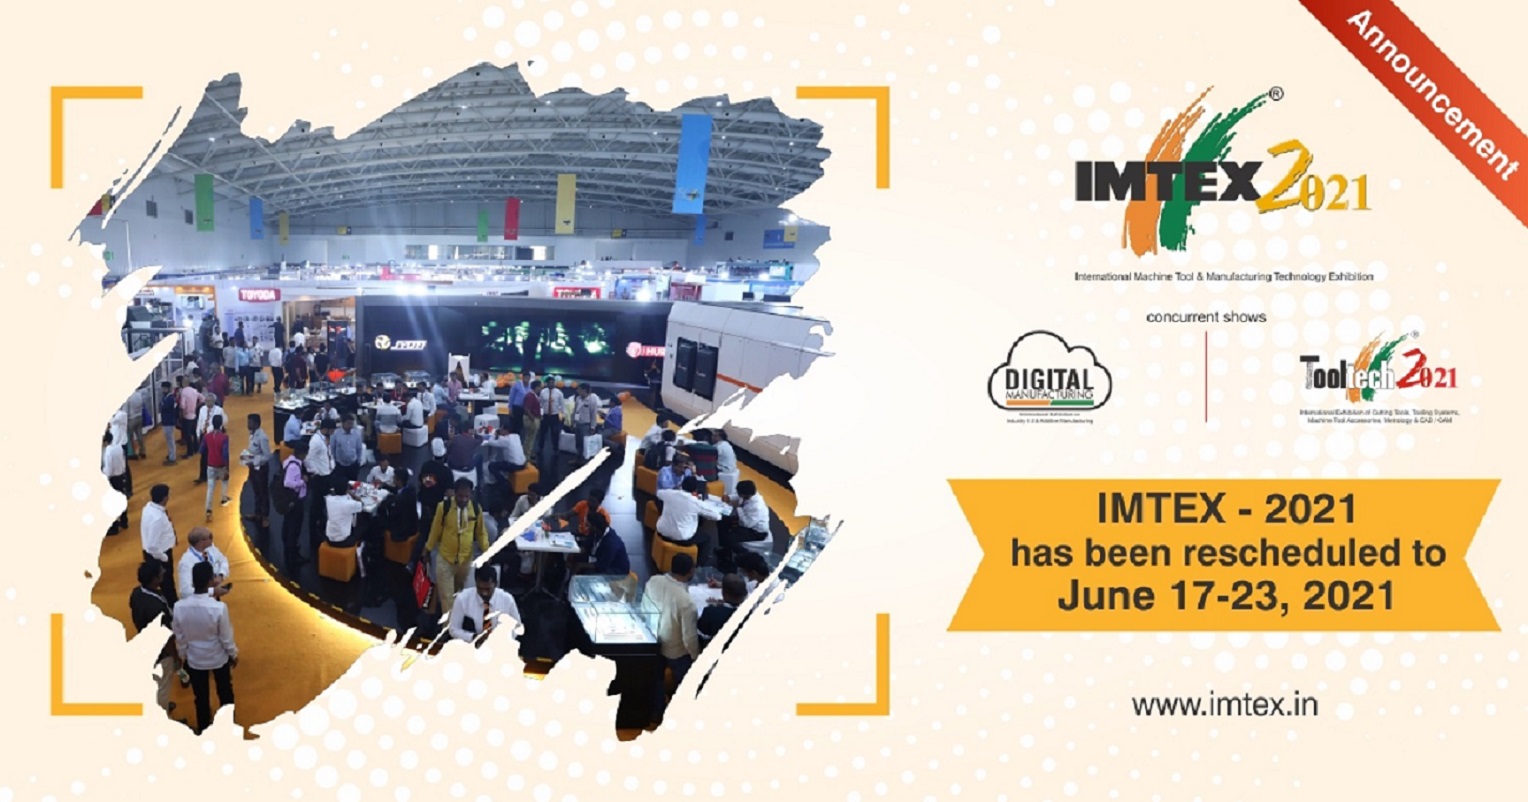 Imtex Upcoming Events Image 1